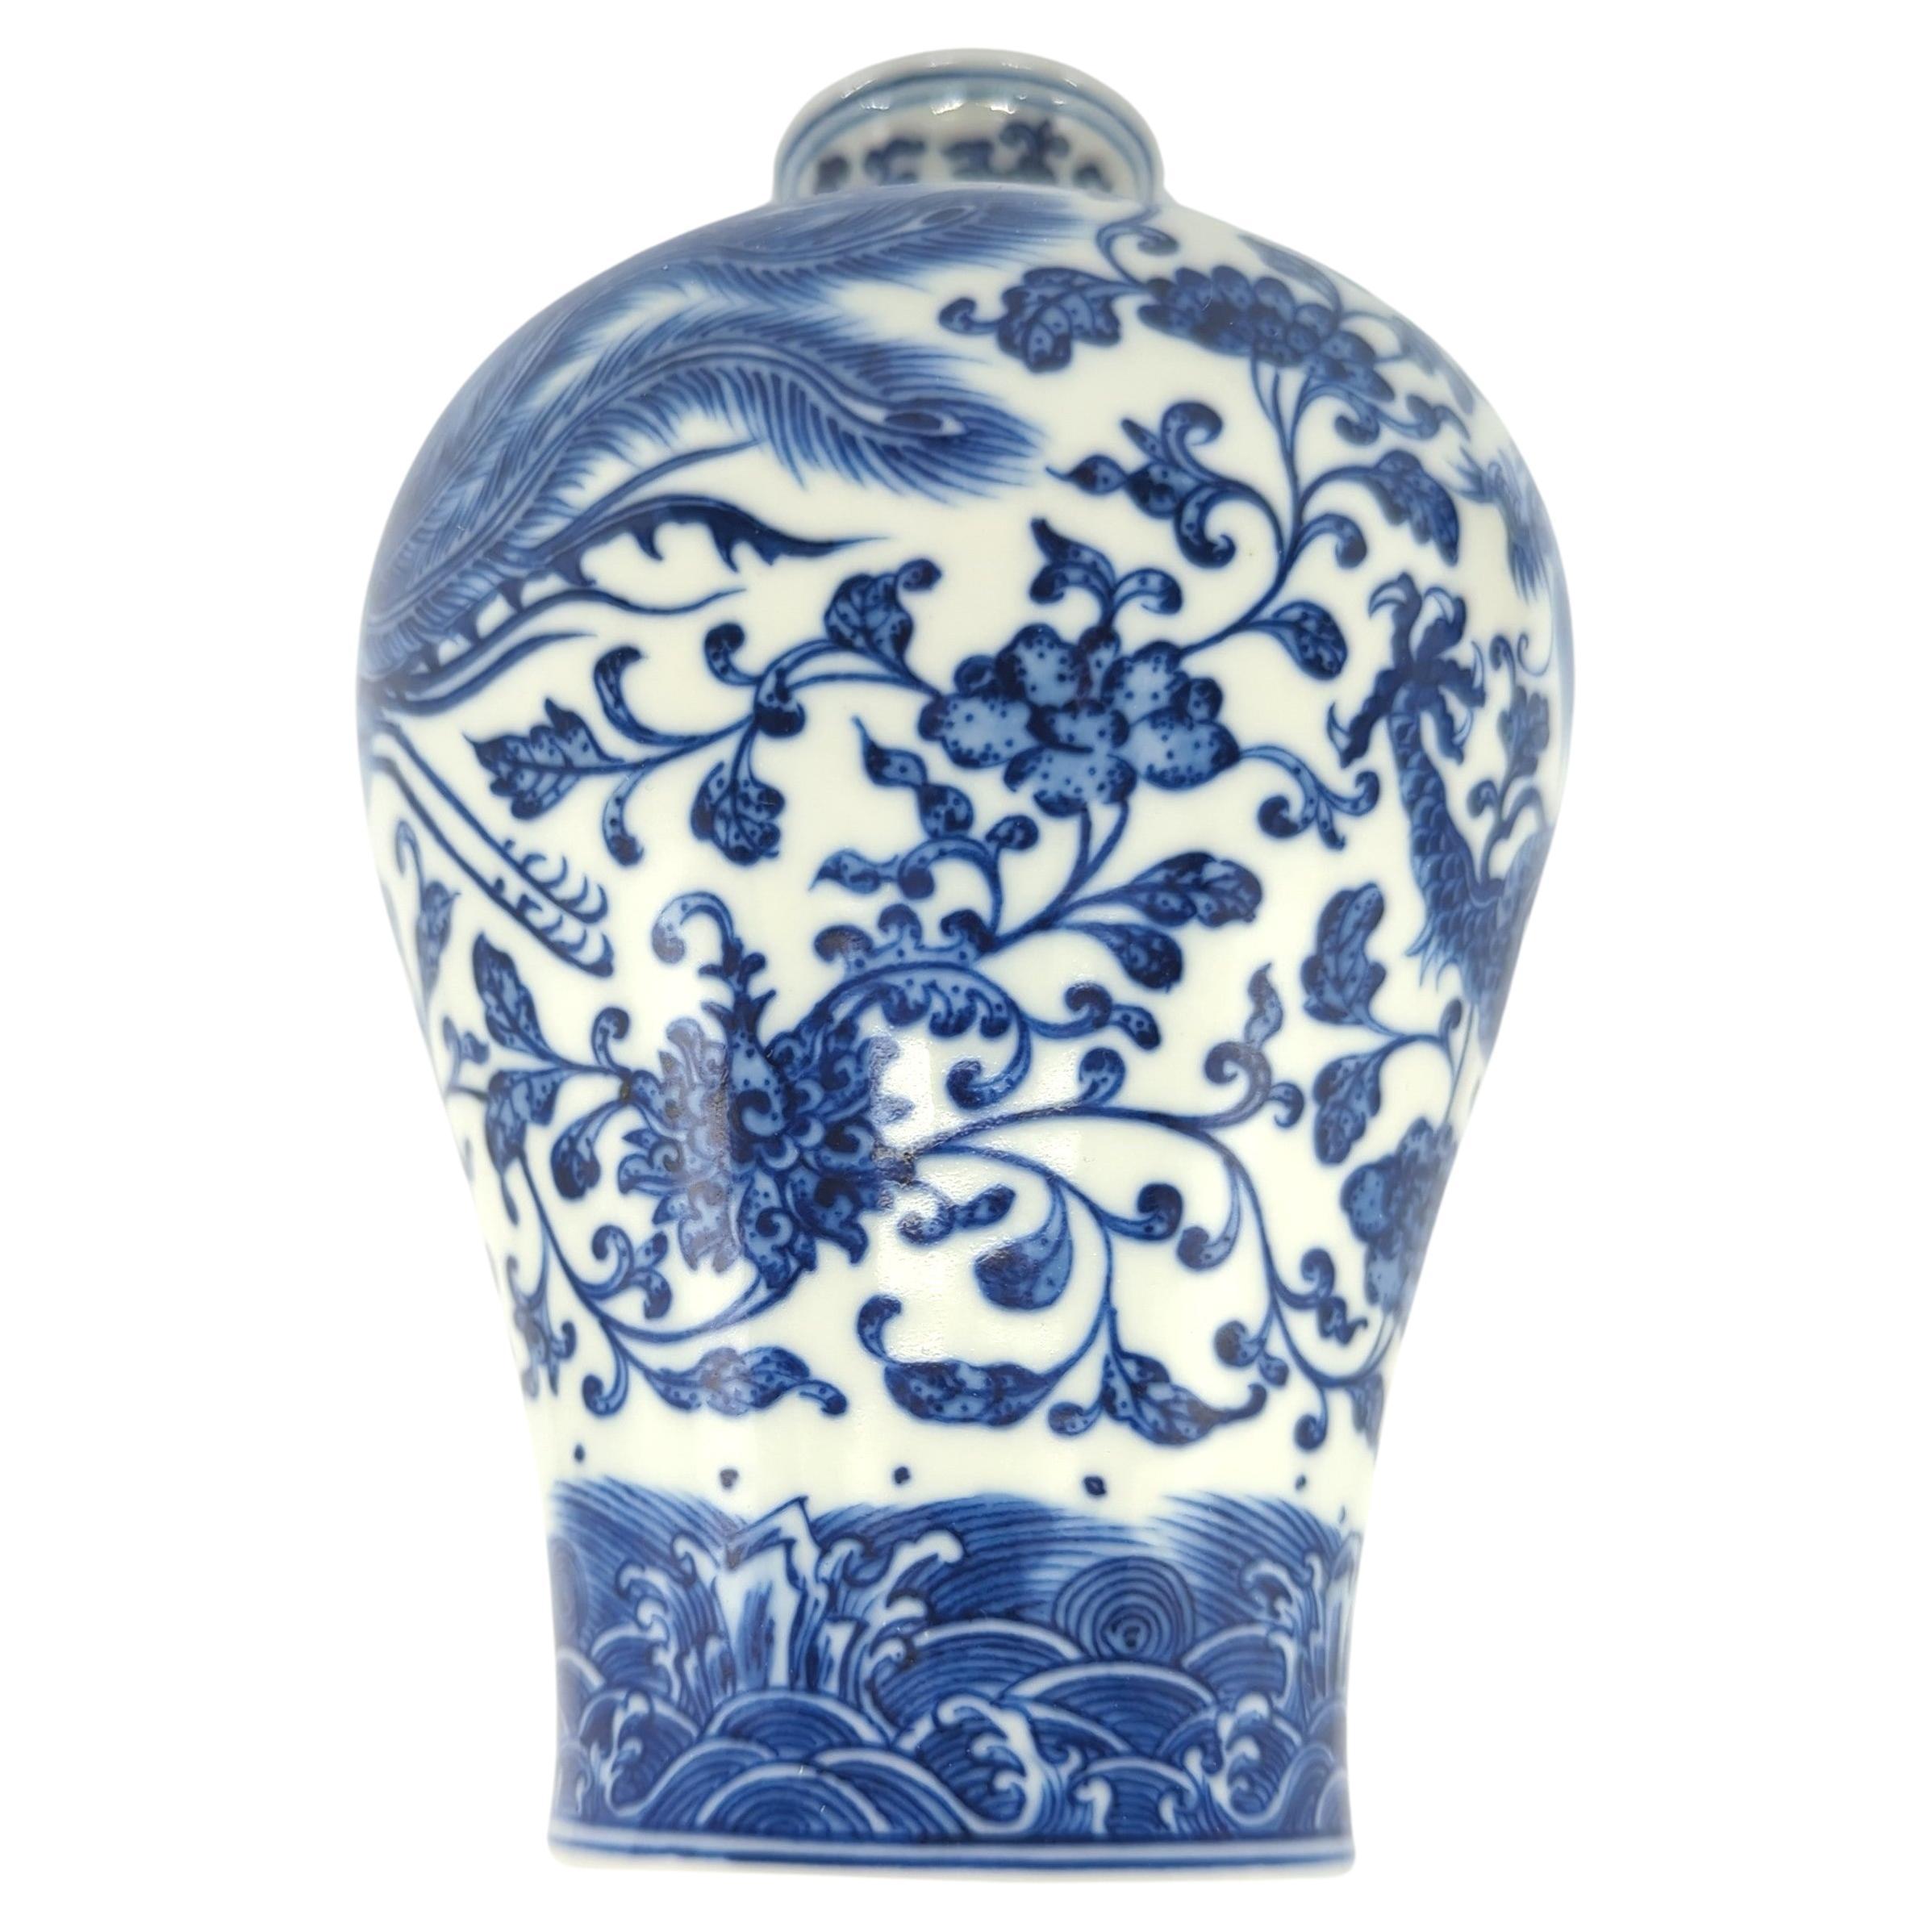 Fine Chinese Porcelain Blue&White Dragon Phoenix Meiping Vase Stand Modern 20c In Excellent Condition For Sale In Richmond, CA